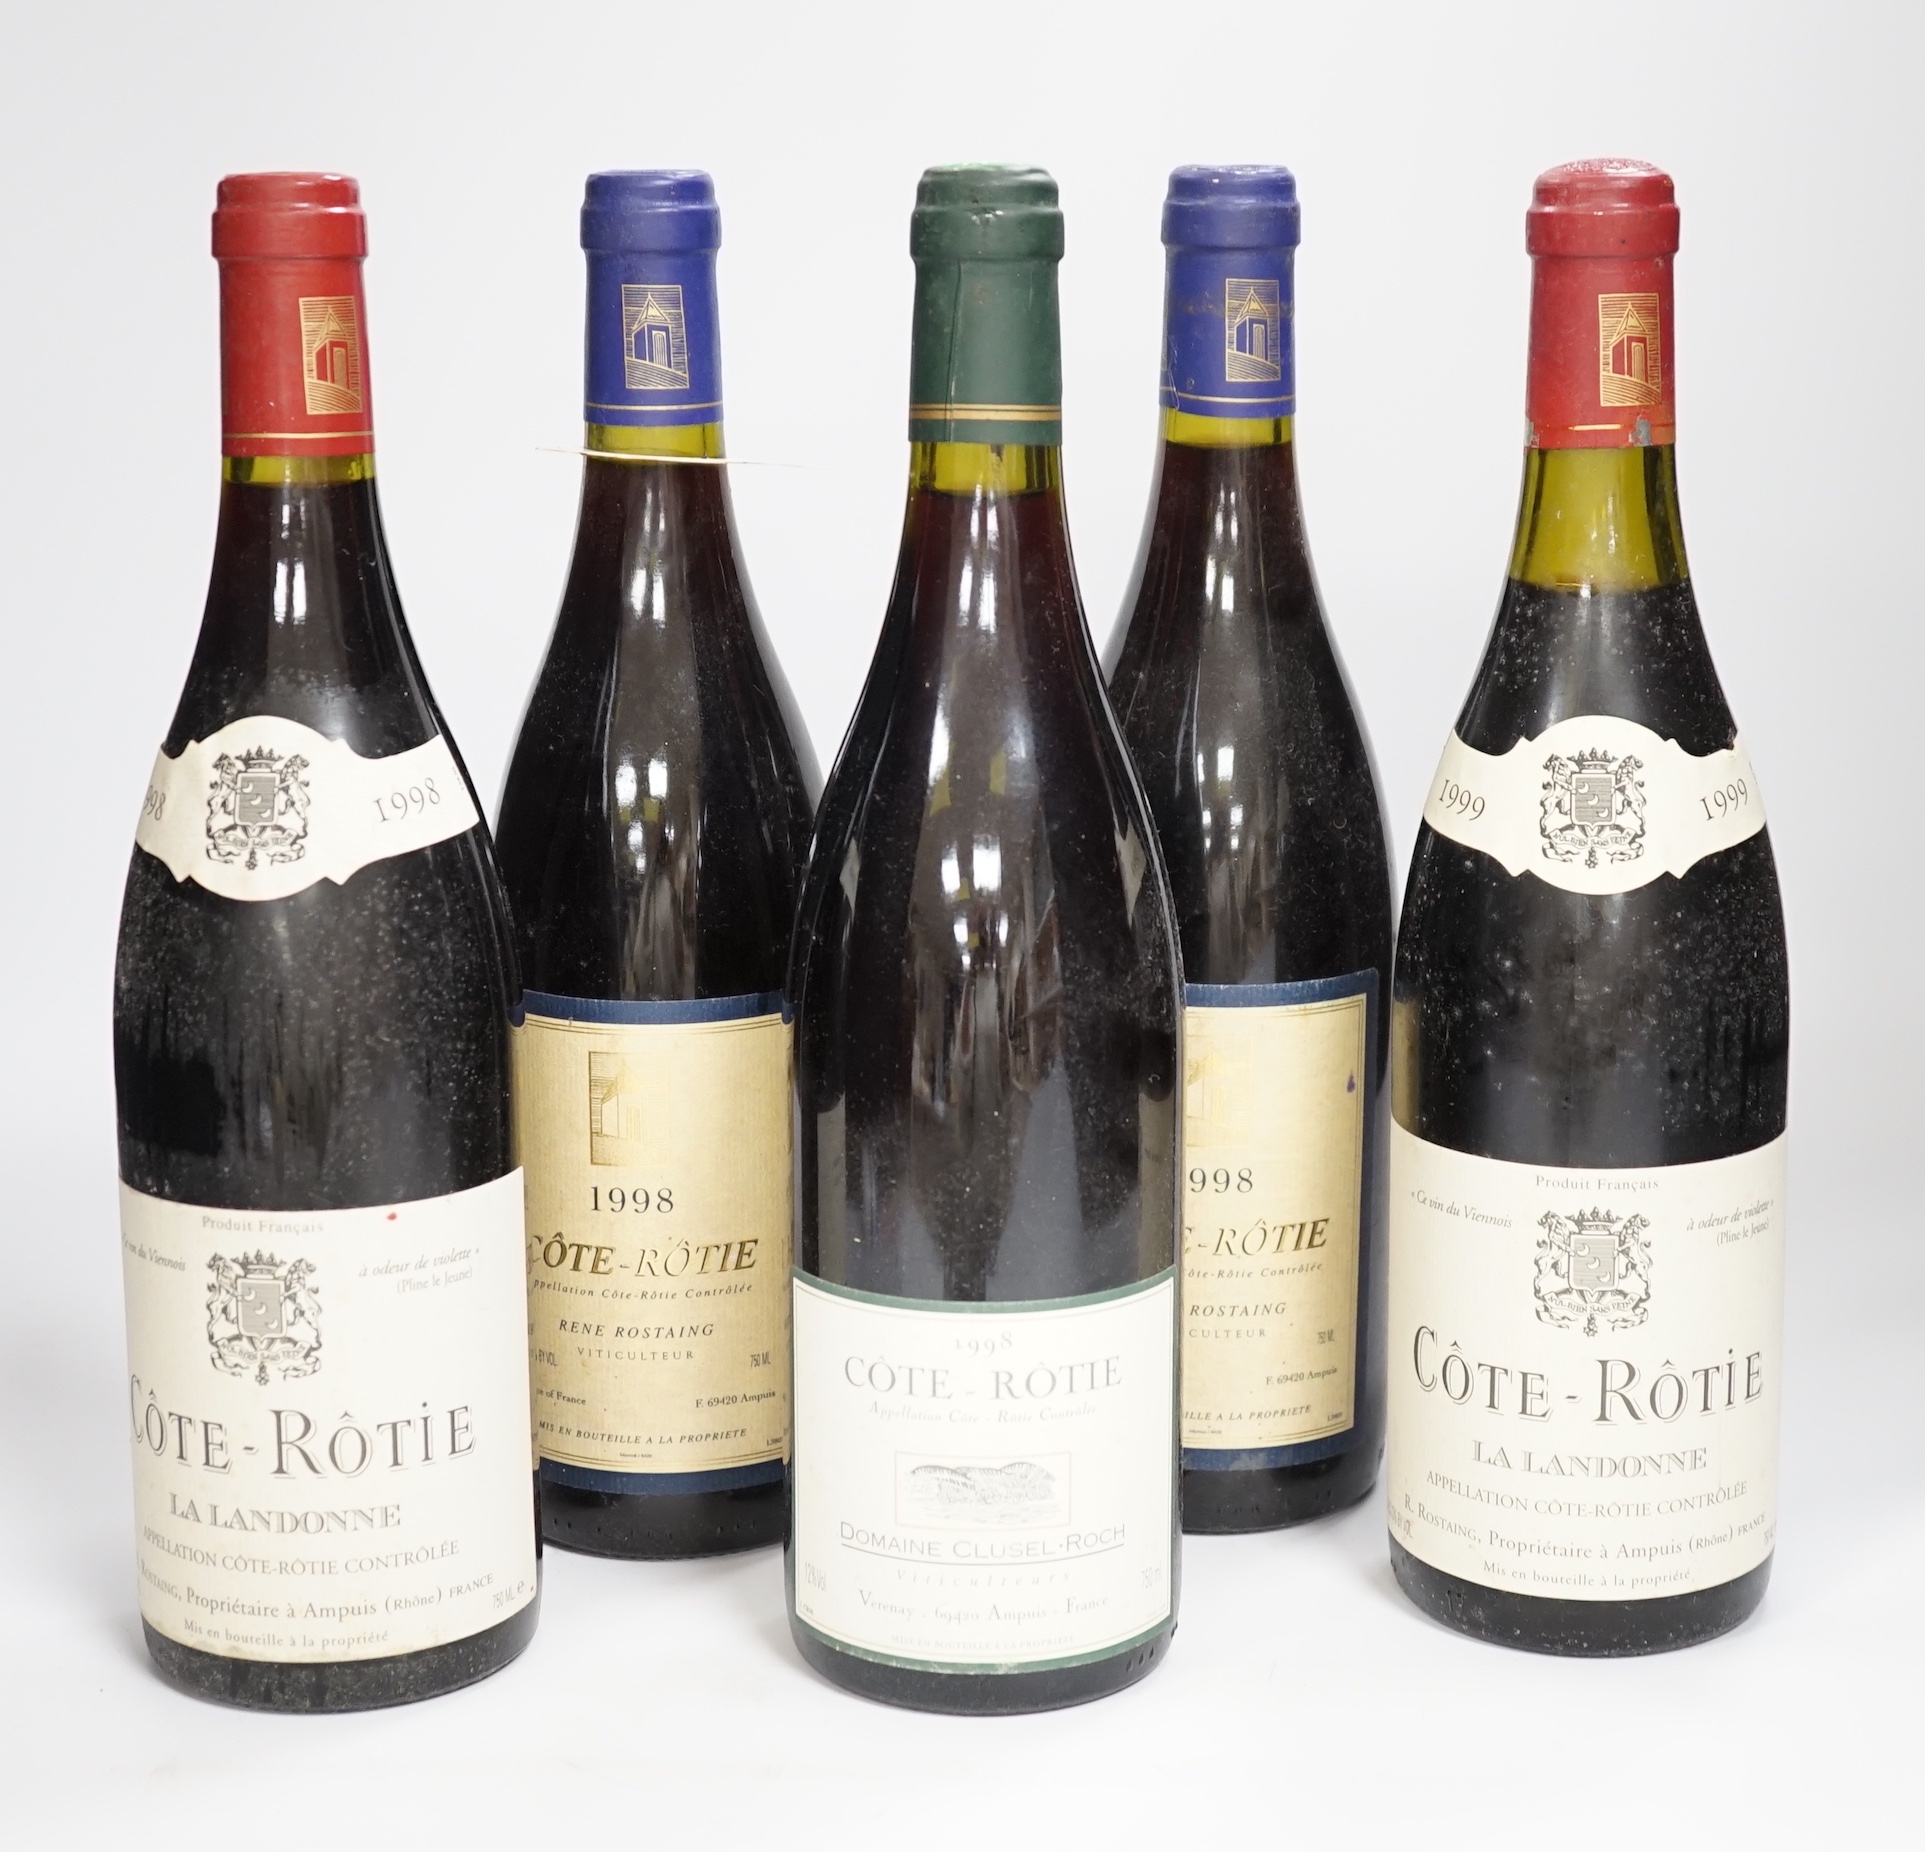 One bottle of Cote-Rotie 1998, two bottles of cotta-Rosie La Landone 1999 and two bottles of Cote-Rotie Renne Rostaing 1998 (5)